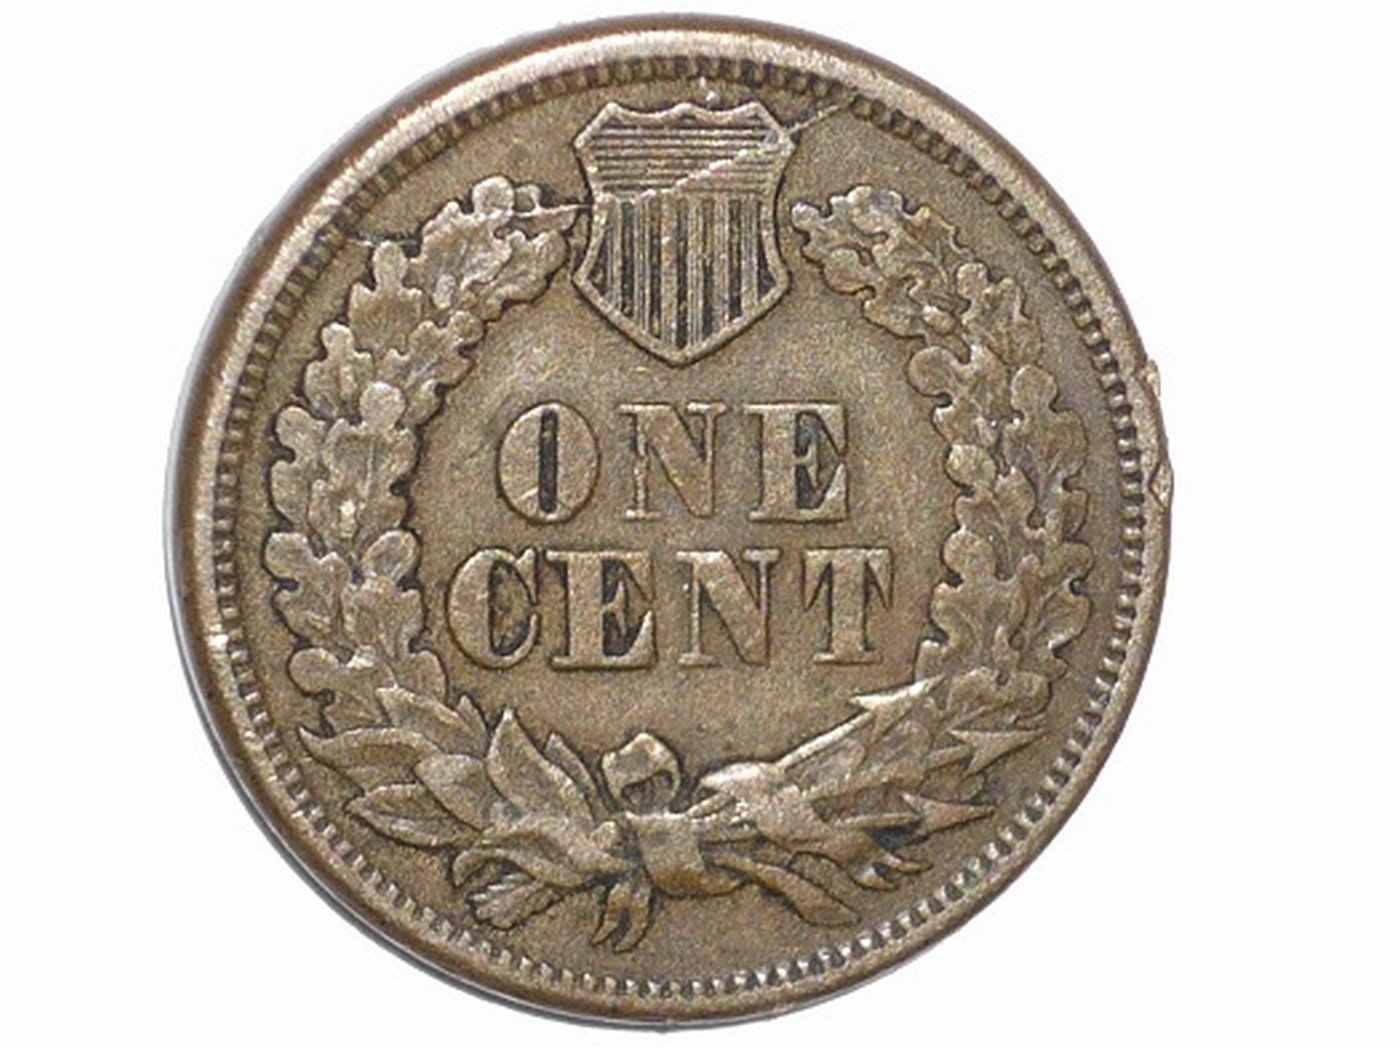 1863 CRK-003 - Indian Head Penny - Photo by David Poliquin